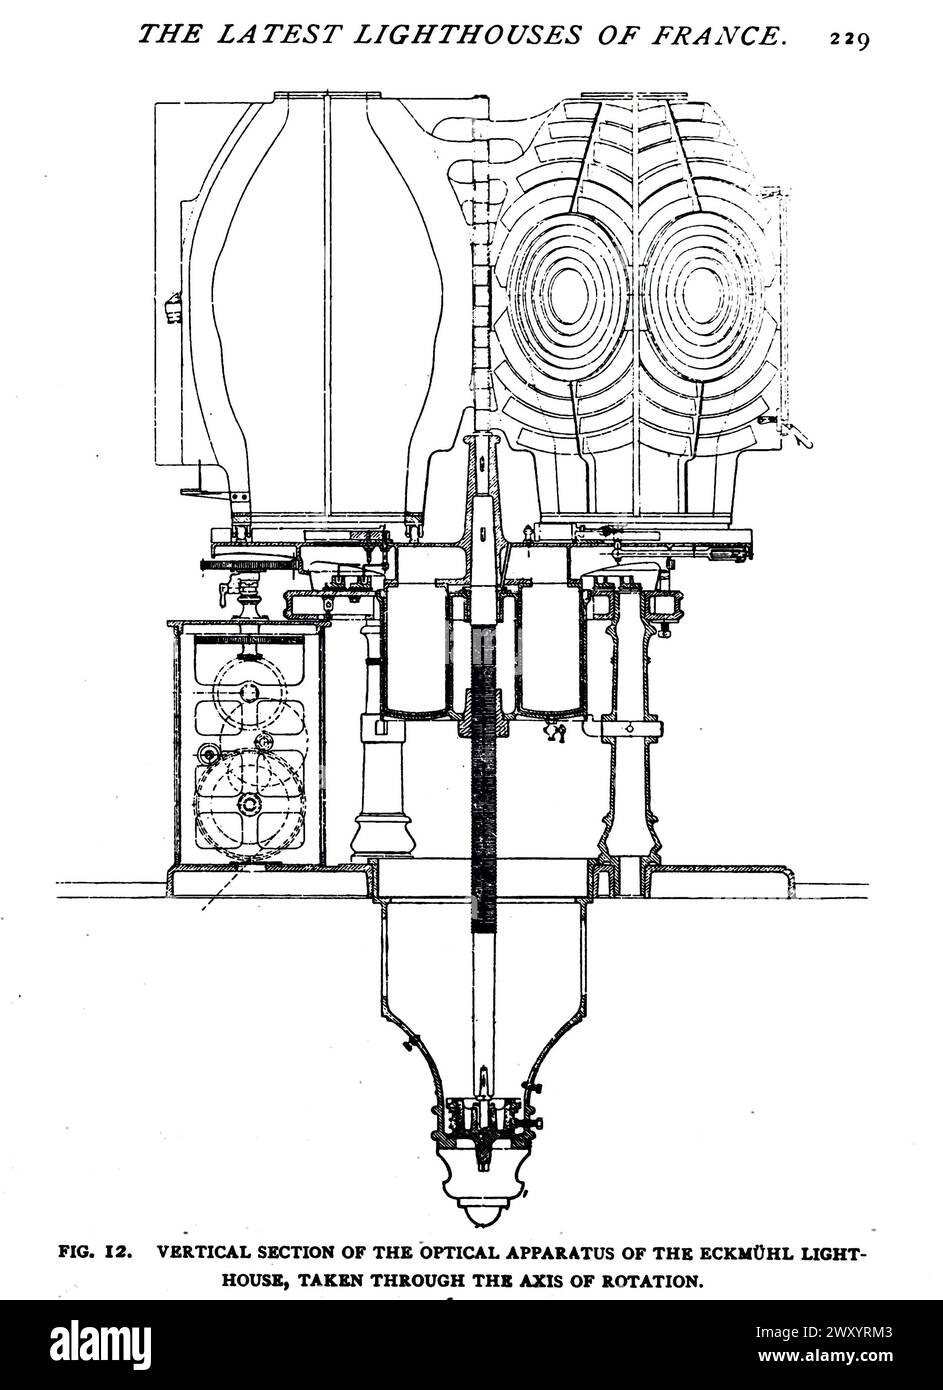 VERTICAL SECTION OF THE OPTICAL APPARATUS OF THE ECKMUHL LIGHTHOUSE, TAKEN THROUGH THE AXIS OF ROTATION. from the Article THE LATEST IMPROVEMENTS IN THE FRENCH LIGHTHOUSE SYSTEM. By Jacques Boyer. from The Engineering Magazine Devoted to Industrial Progress Volume XVI October 1898 - March 1899 The Engineering Magazine Co Stock Photo